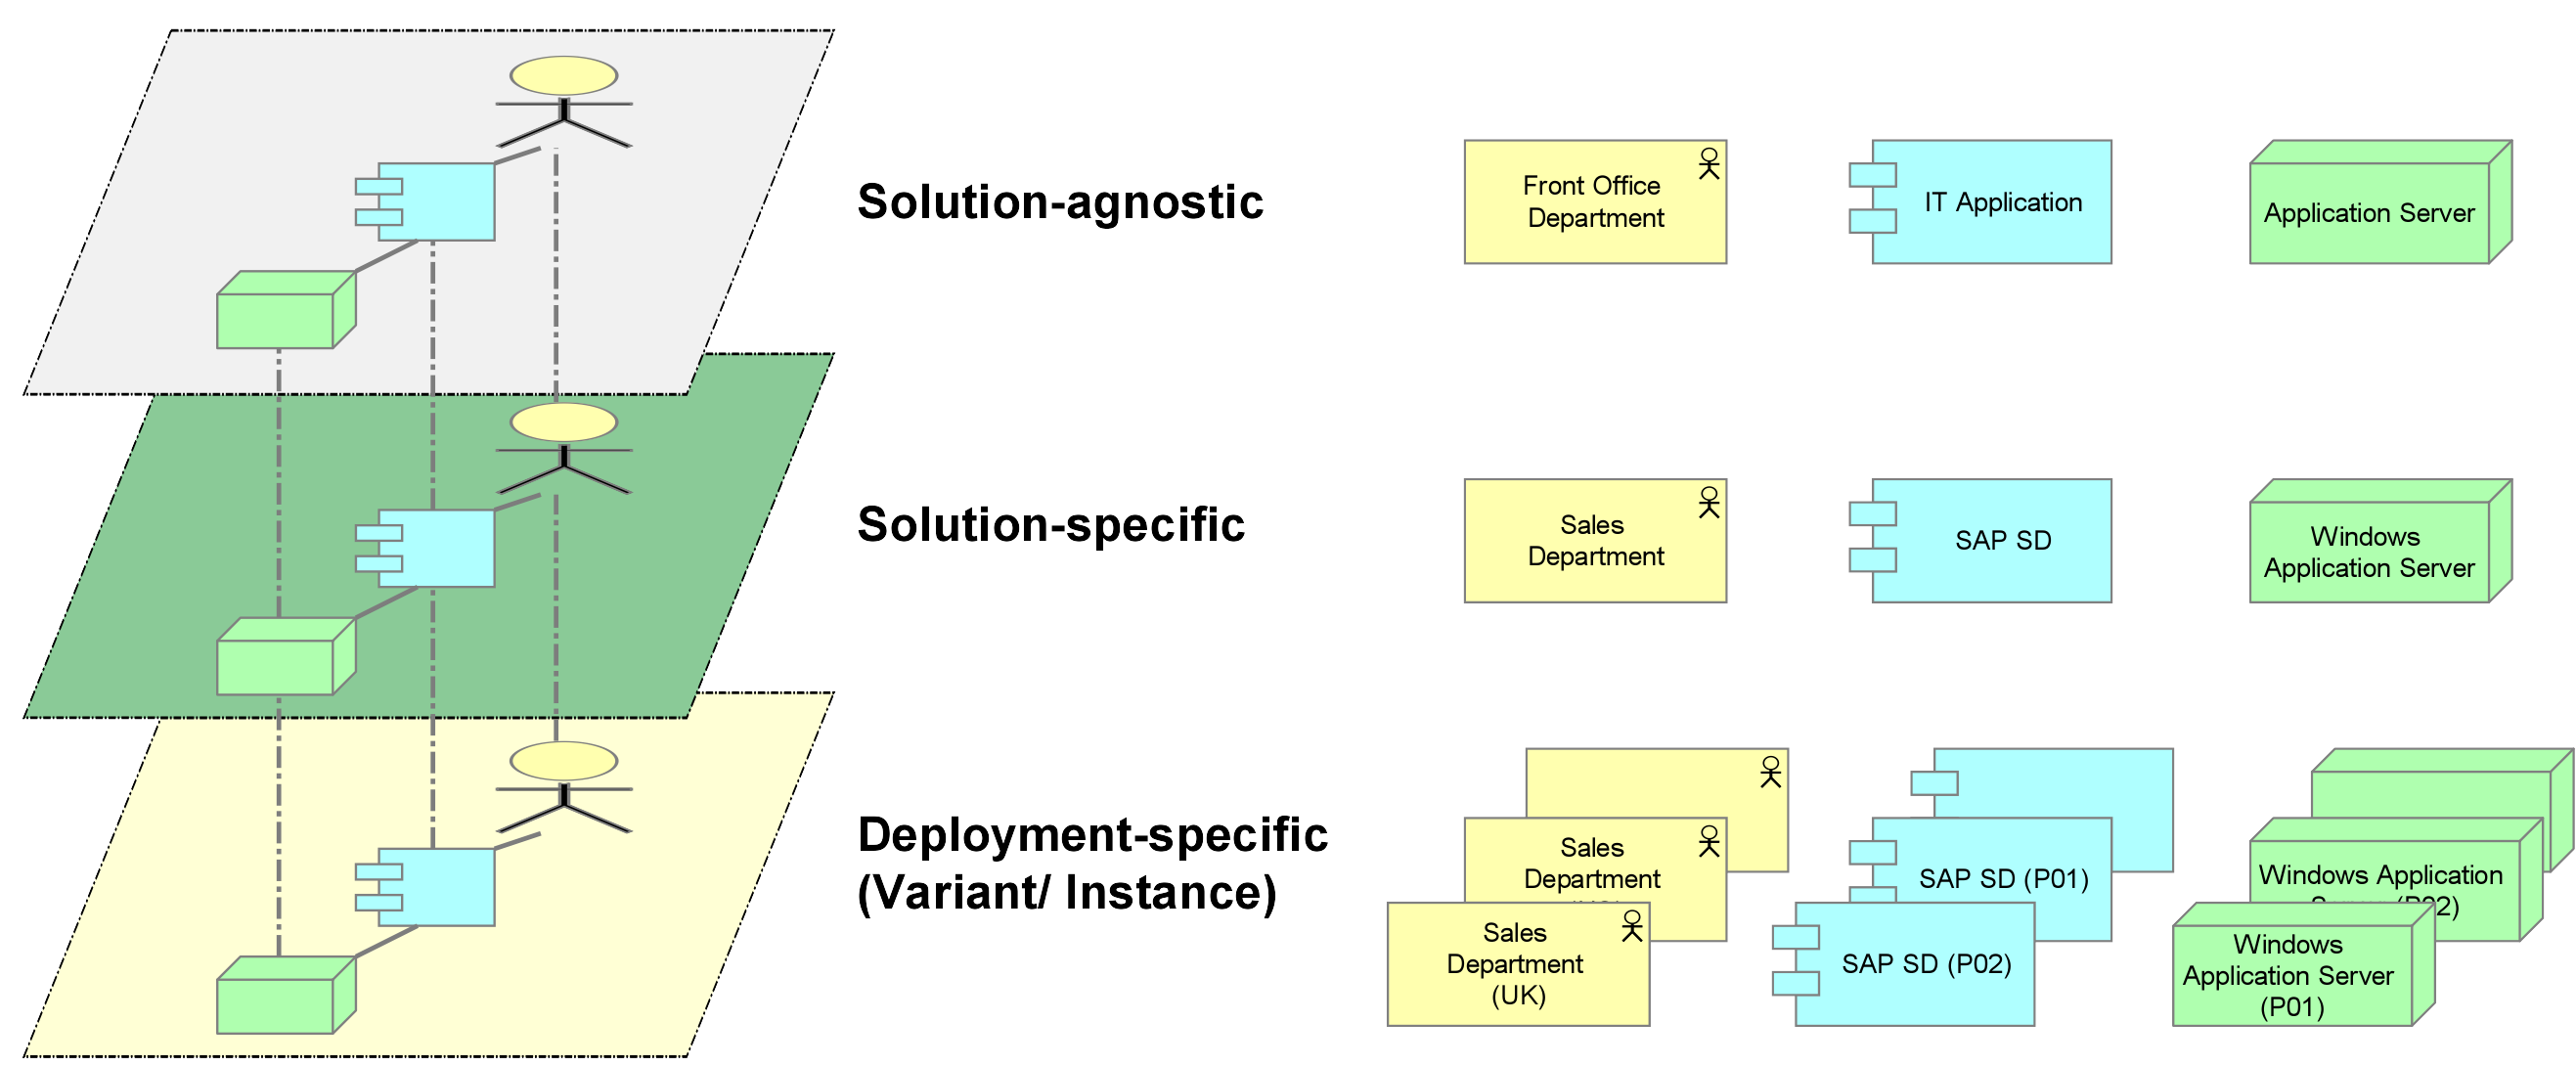 levels of abstraction in enterprise architecture